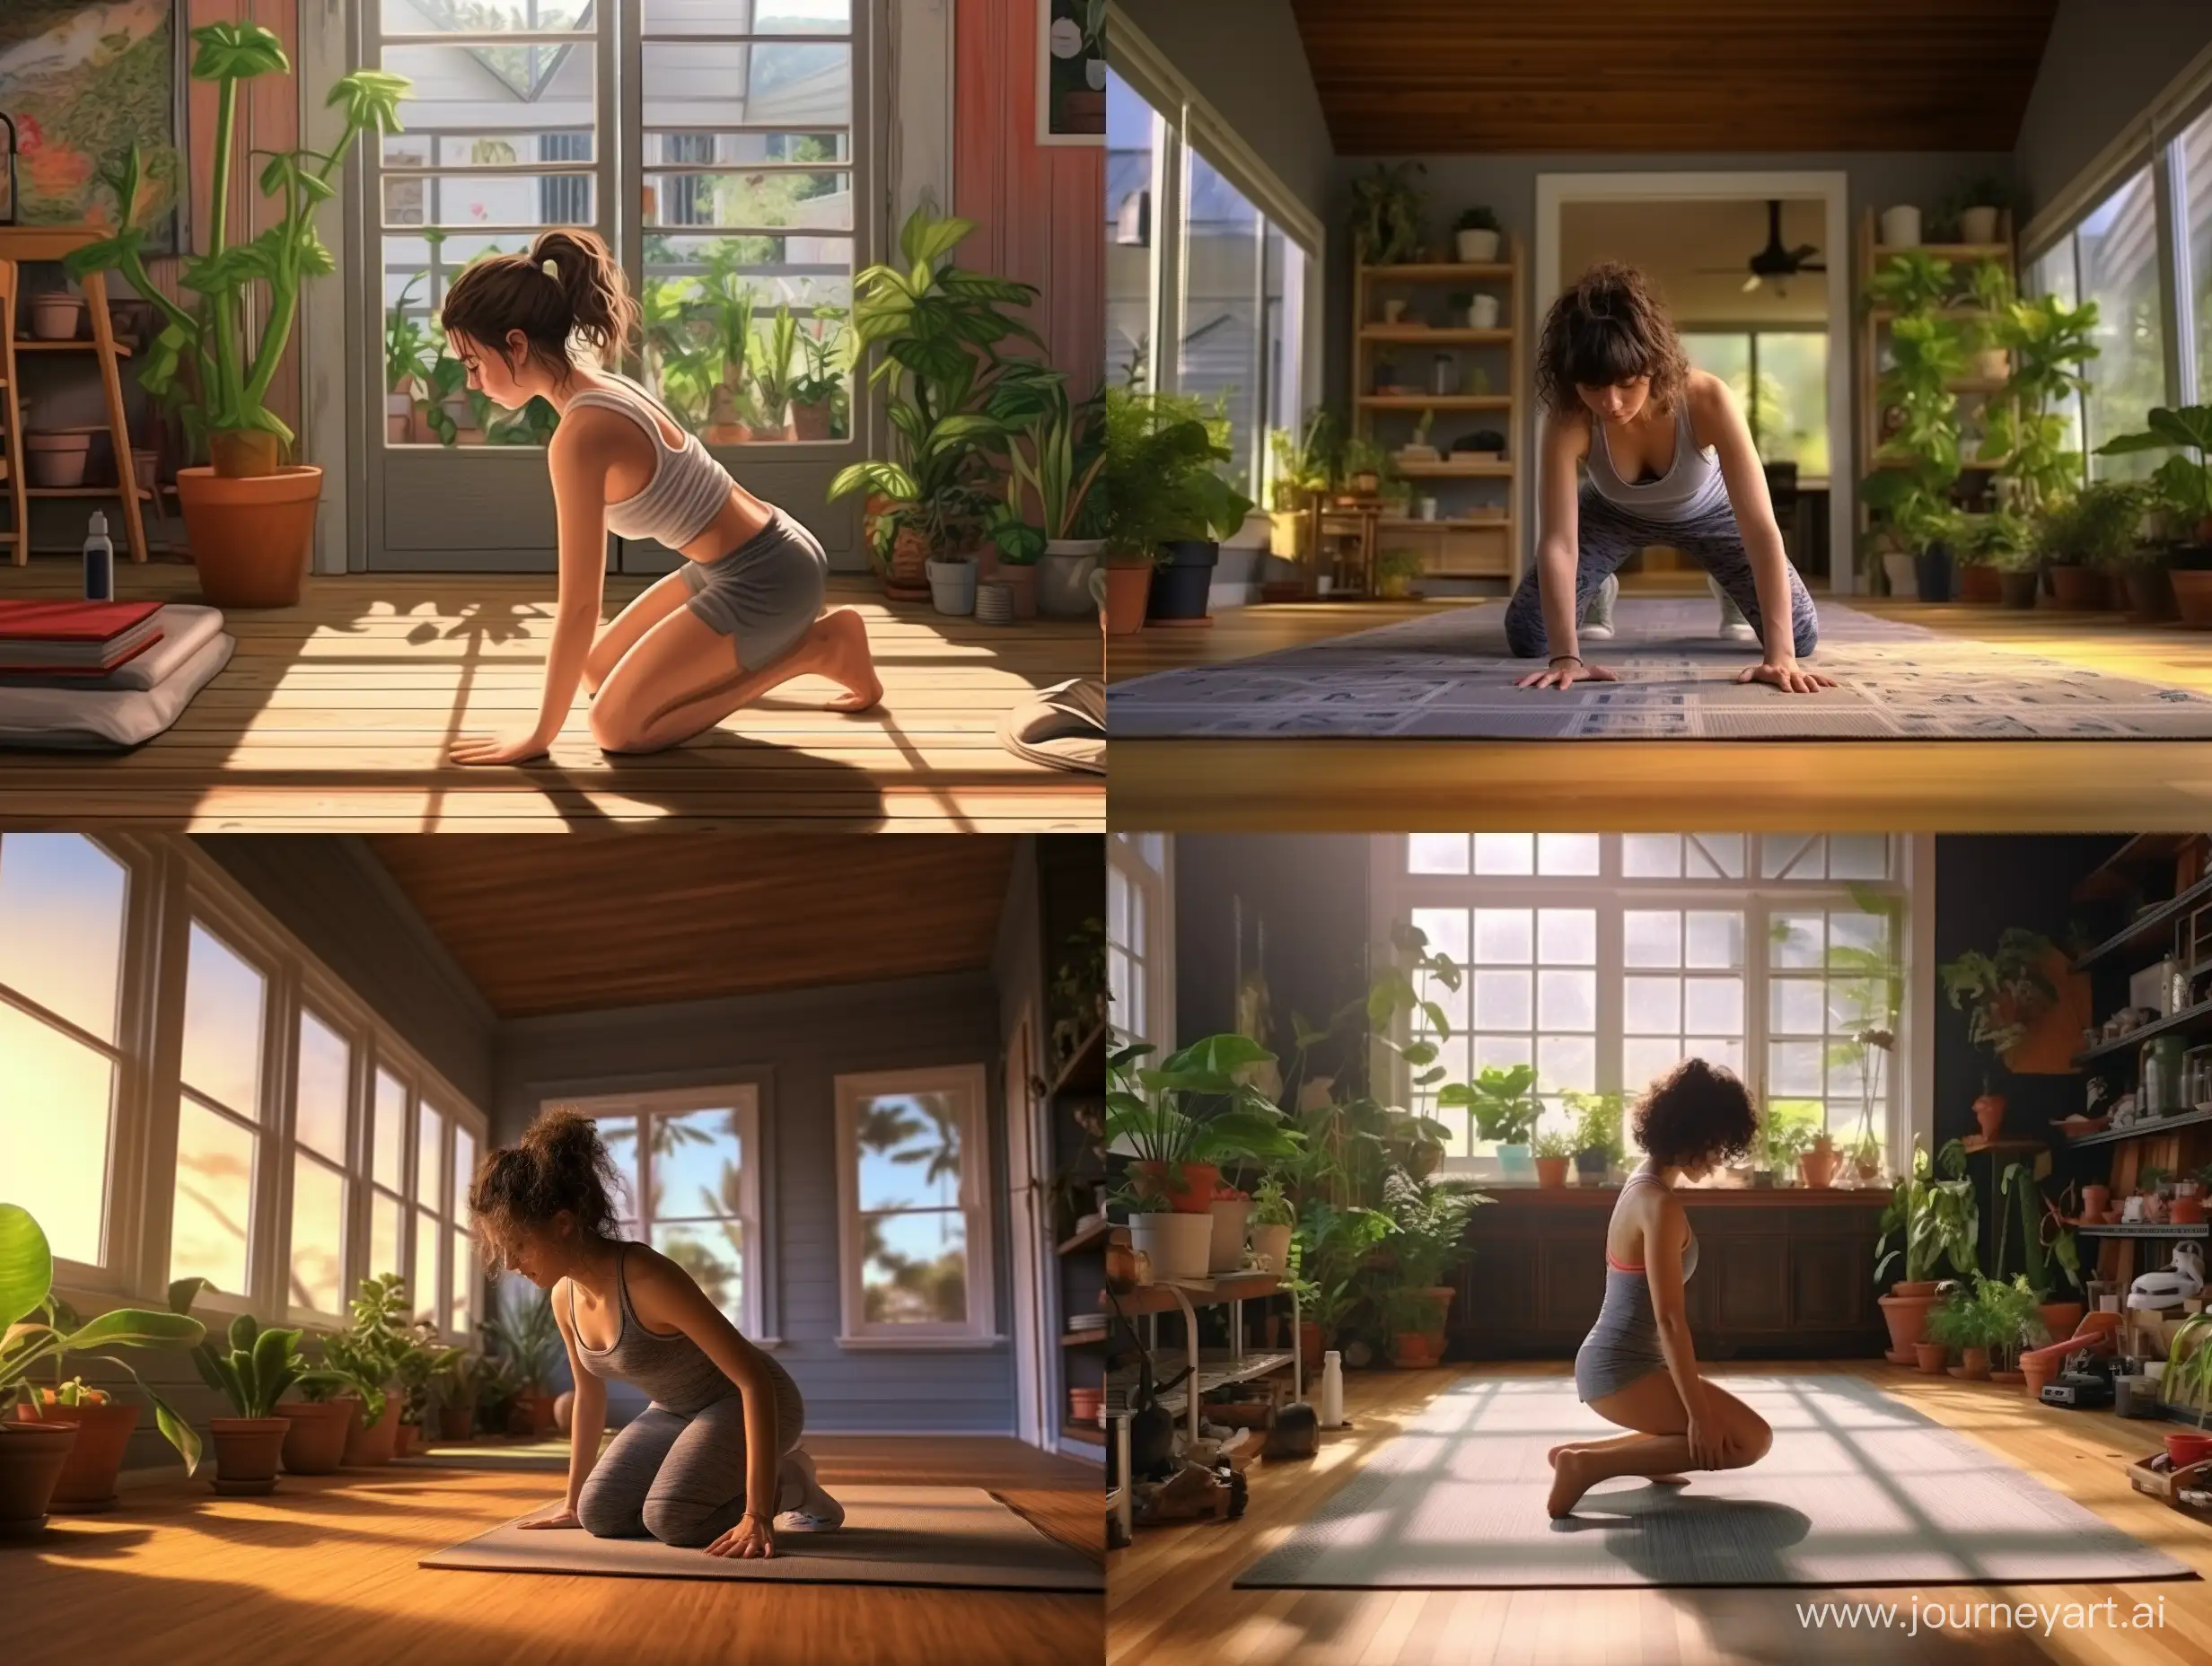 Girl doing push-ups at home on a mat, exercise, beautiful room, potted plants, wooden floor, photorealism, 8k